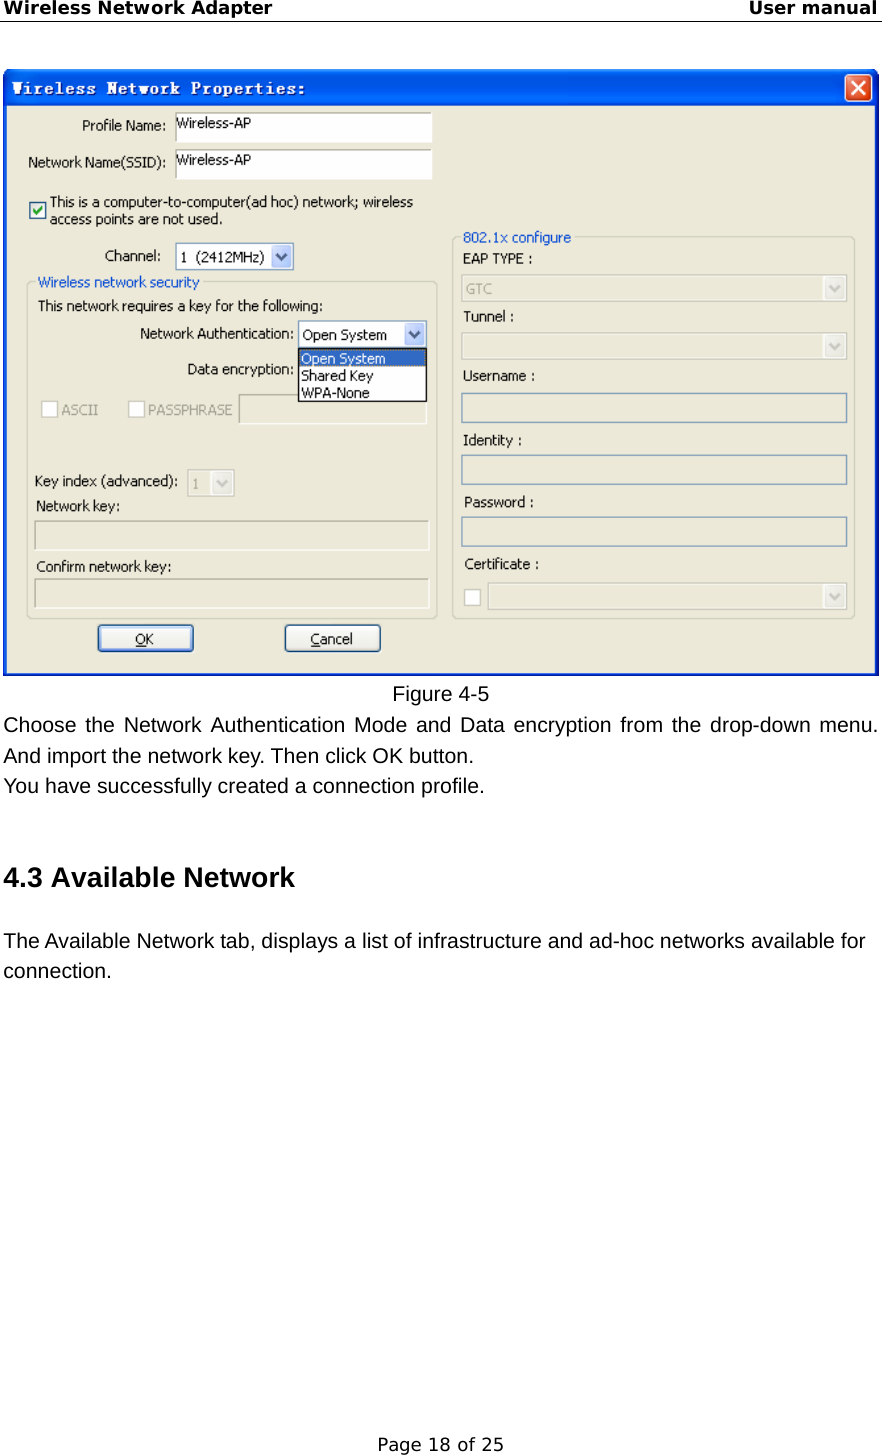 Wireless Network Adapter                                                    User manual Page 18 of 25  Figure 4-5 Choose the Network Authentication Mode and Data encryption from the drop-down menu. And import the network key. Then click OK button. You have successfully created a connection profile.  4.3 Available Network The Available Network tab, displays a list of infrastructure and ad-hoc networks available for connection.  